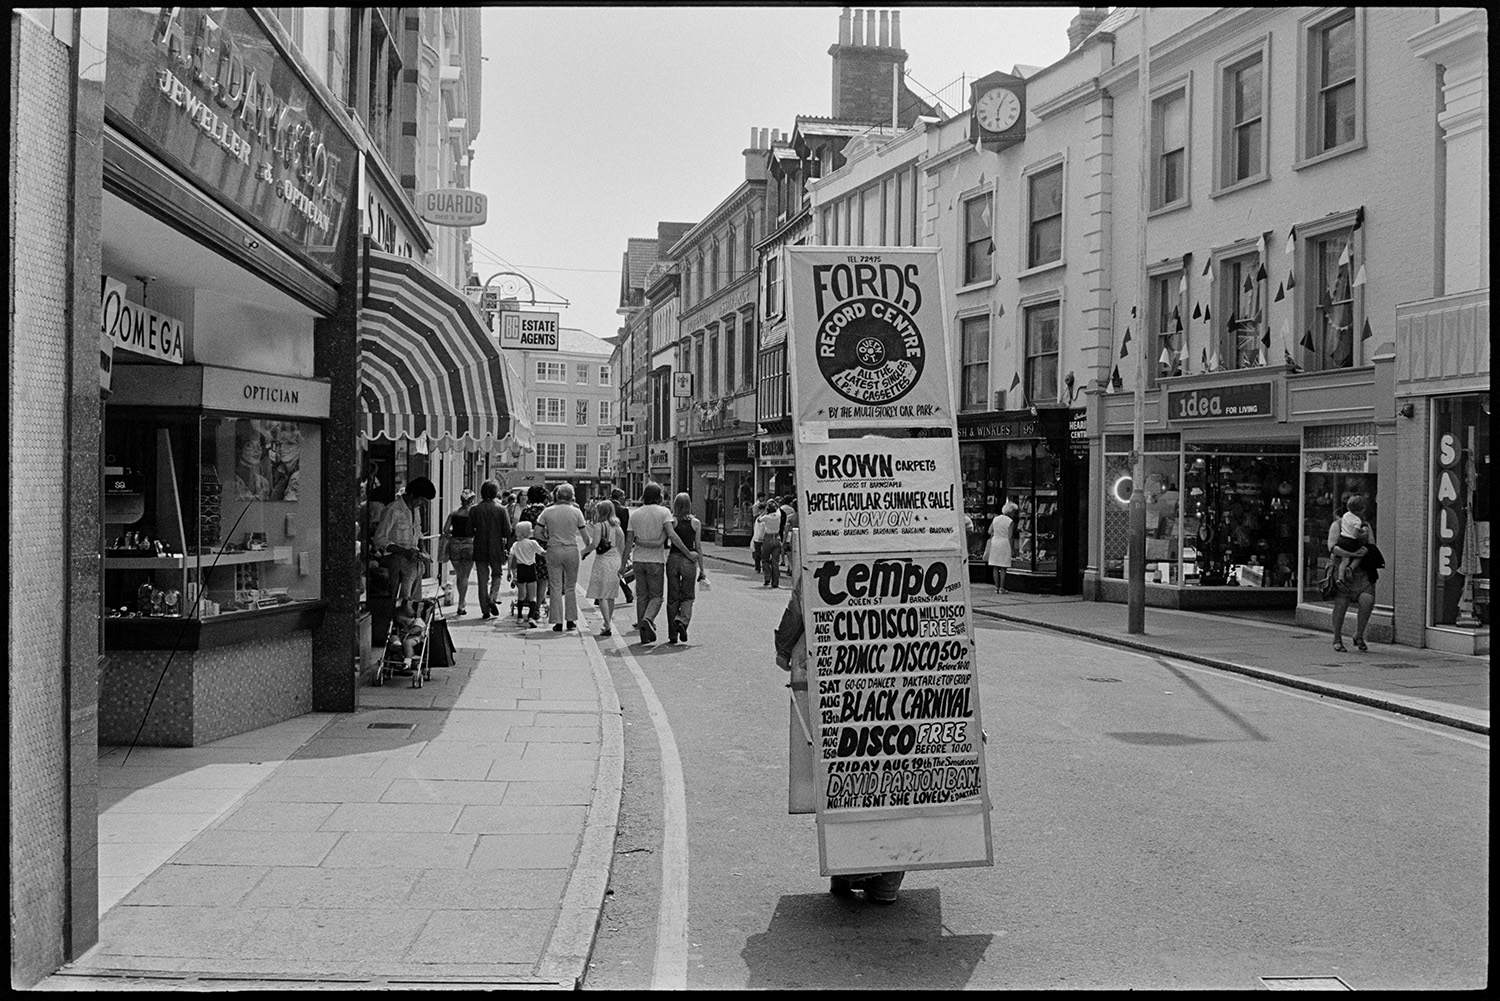 Street scene with sandwich man advertising record shop. 
[A person wearing a sandwich board advertising Fords Record Centre, Crown Carpets and various discos stood in Barnstaple High Street. Shoppers and various shop fronts can be seen including Idea for Living, Garnish and Winkles, Jewellers, A E Dark & Son , Jeweller and Optician and B C Estate Agents.]